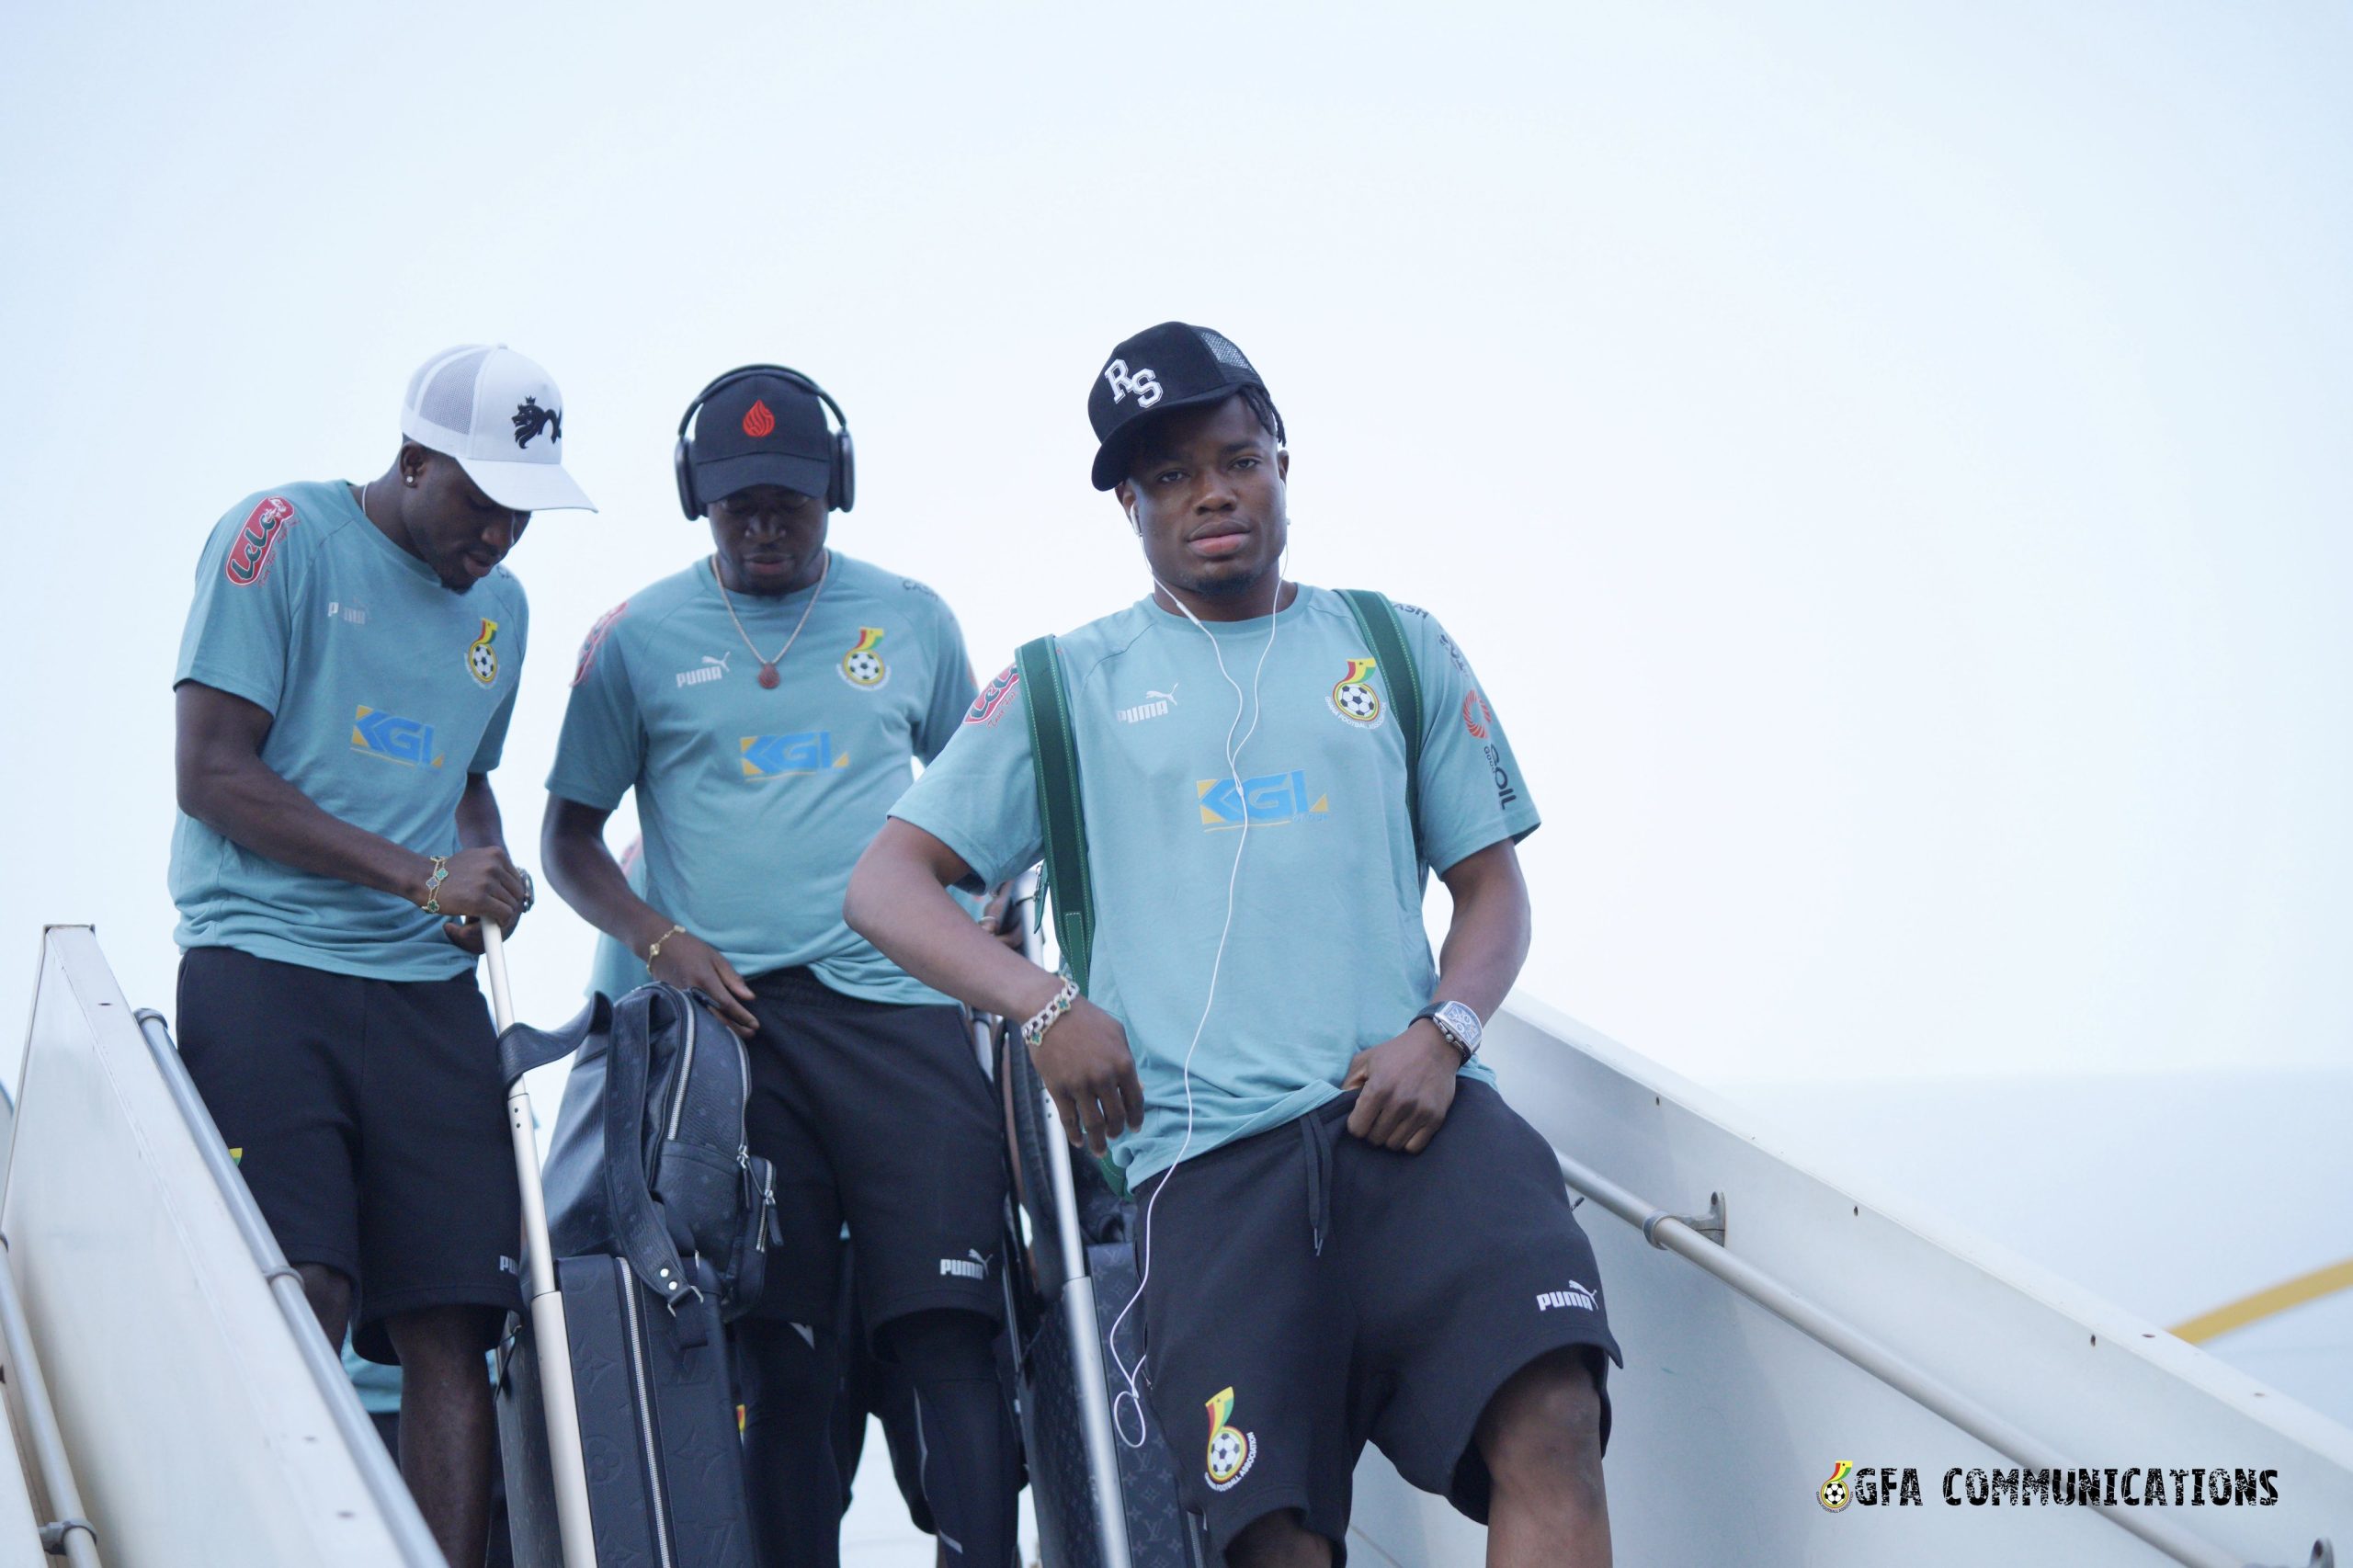 Black Stars return home after dramatic victory over Mali in World Cup qualifier